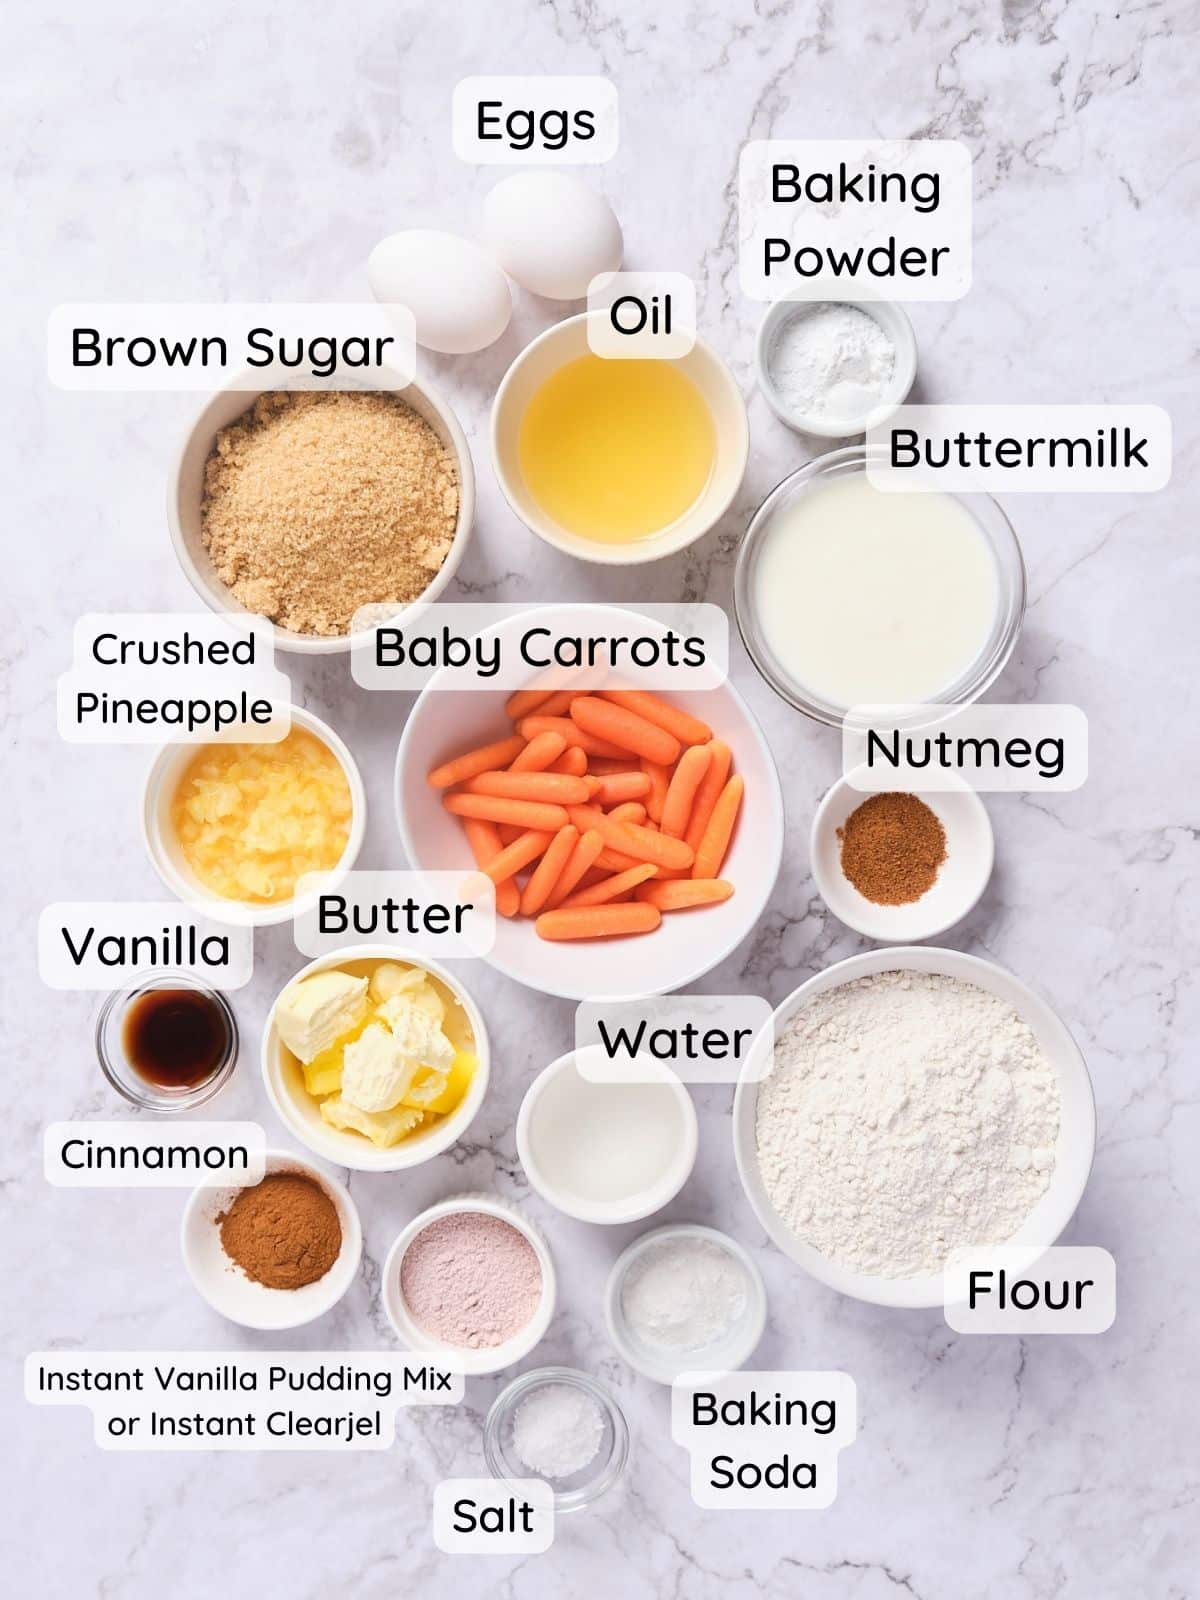 A shot of all the carrot cake batter ingredients with the text "flour, brown sugar, baking powder, baking soda, salt, instant pudding mix, instant clearjel, butter, oil, water, buttermilk, vanilla, cinnamon, nutmeg, baby carrots, and crushed pineapple."